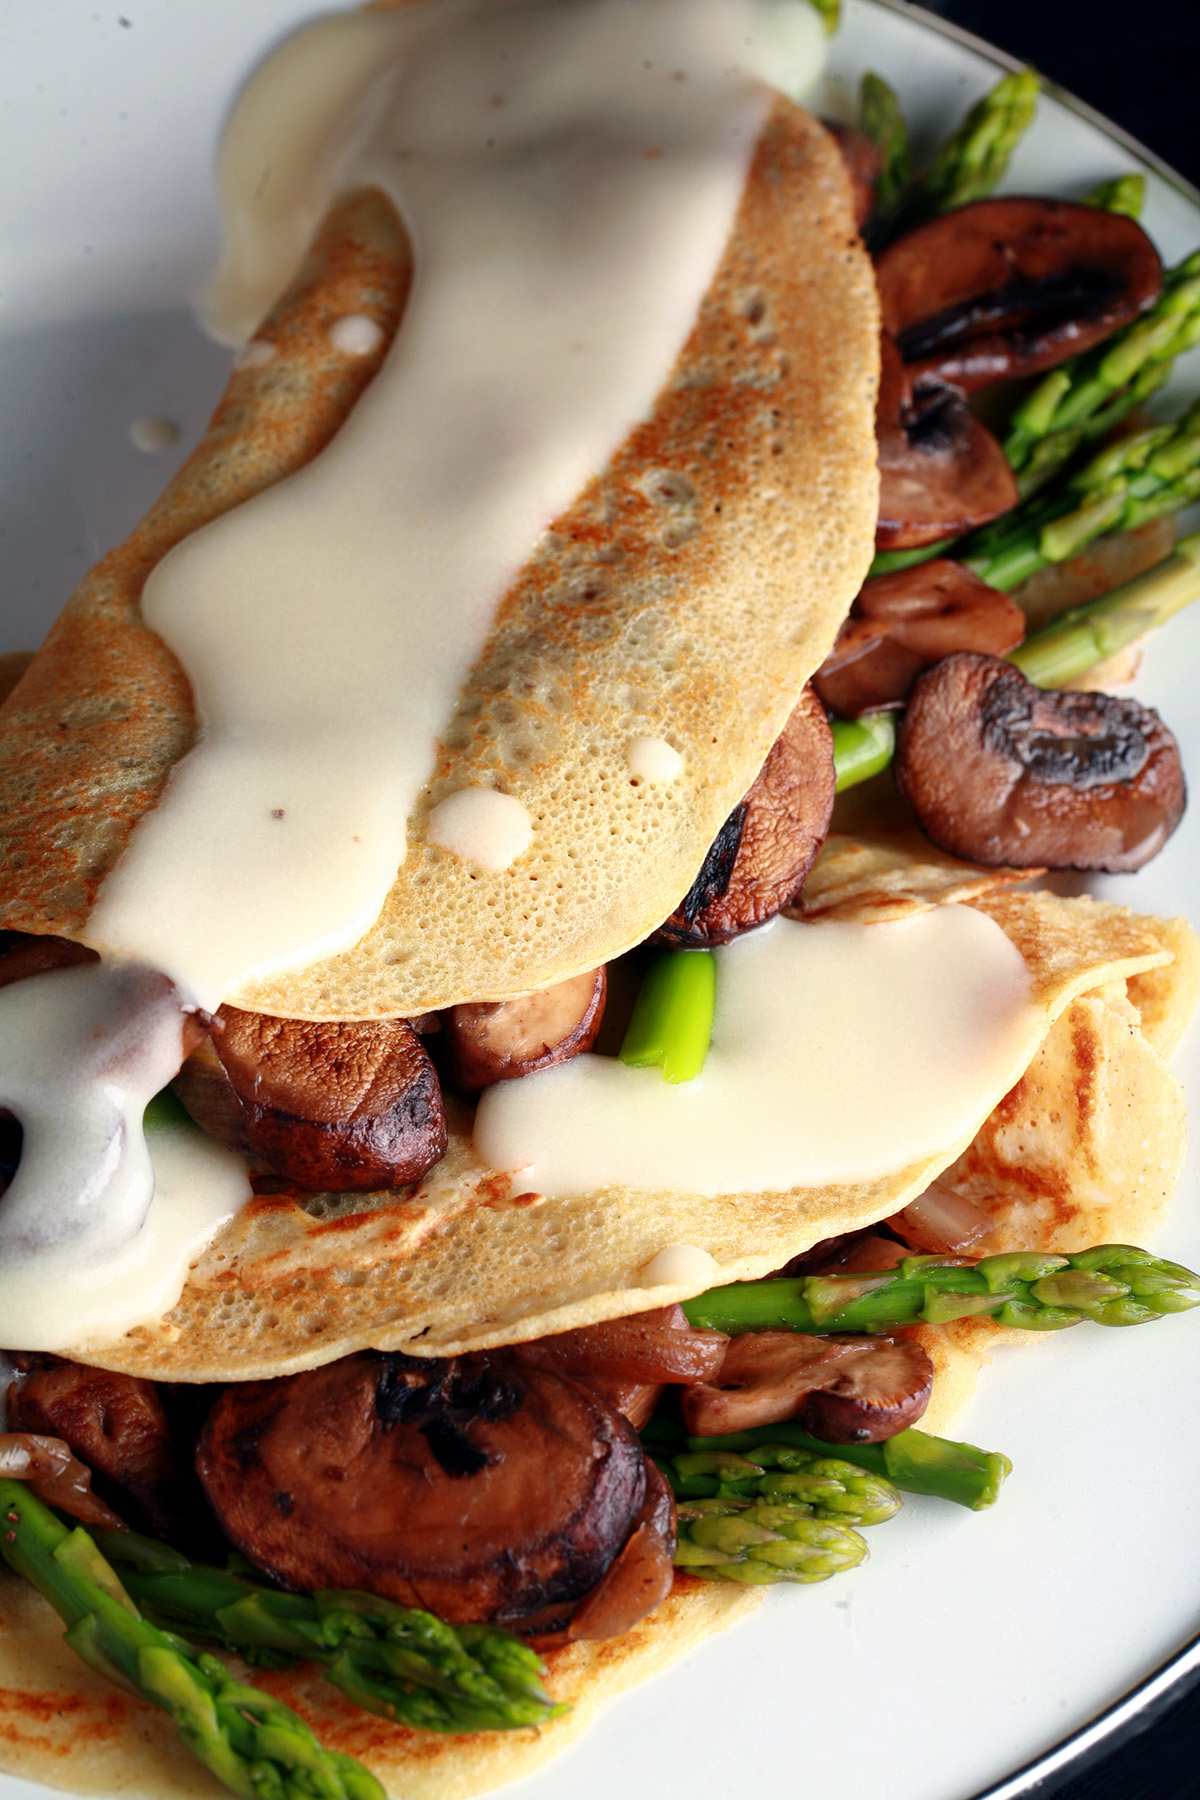 Two gluten free crepes stuffed with mushrooms and aspagus, drizzled with Swiss cheese sauce.